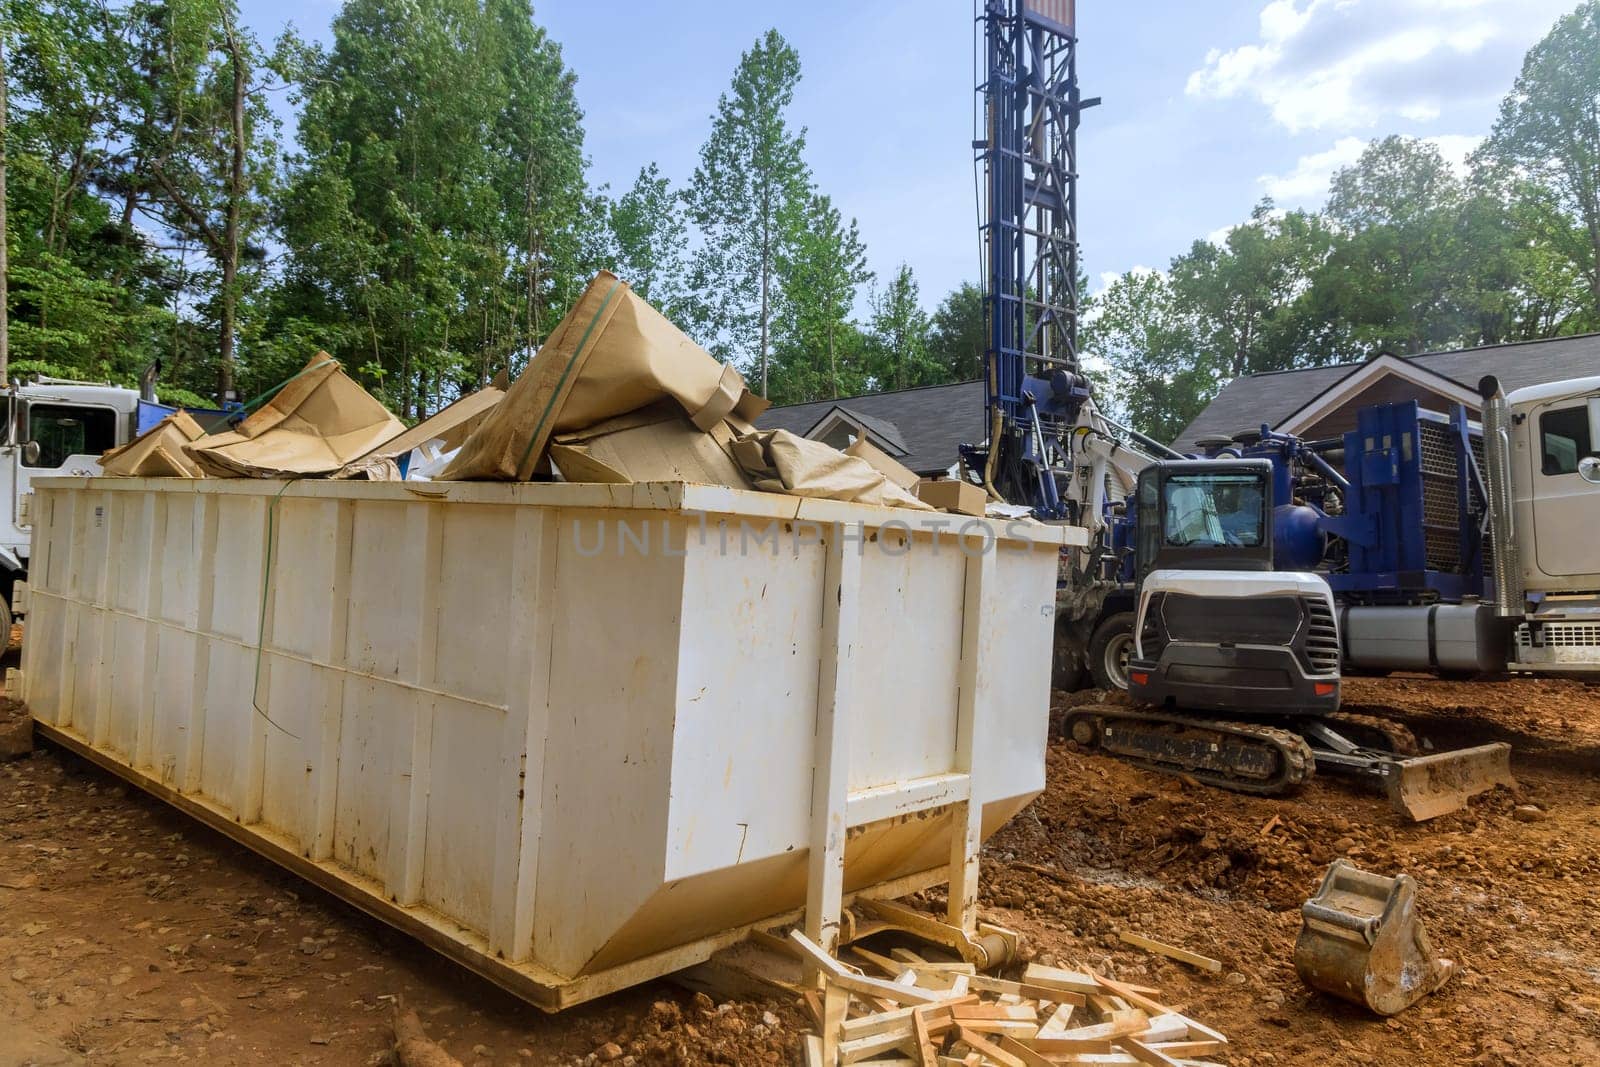 Providing containers for disposal of trash recycling construction waste in manner that respects environment